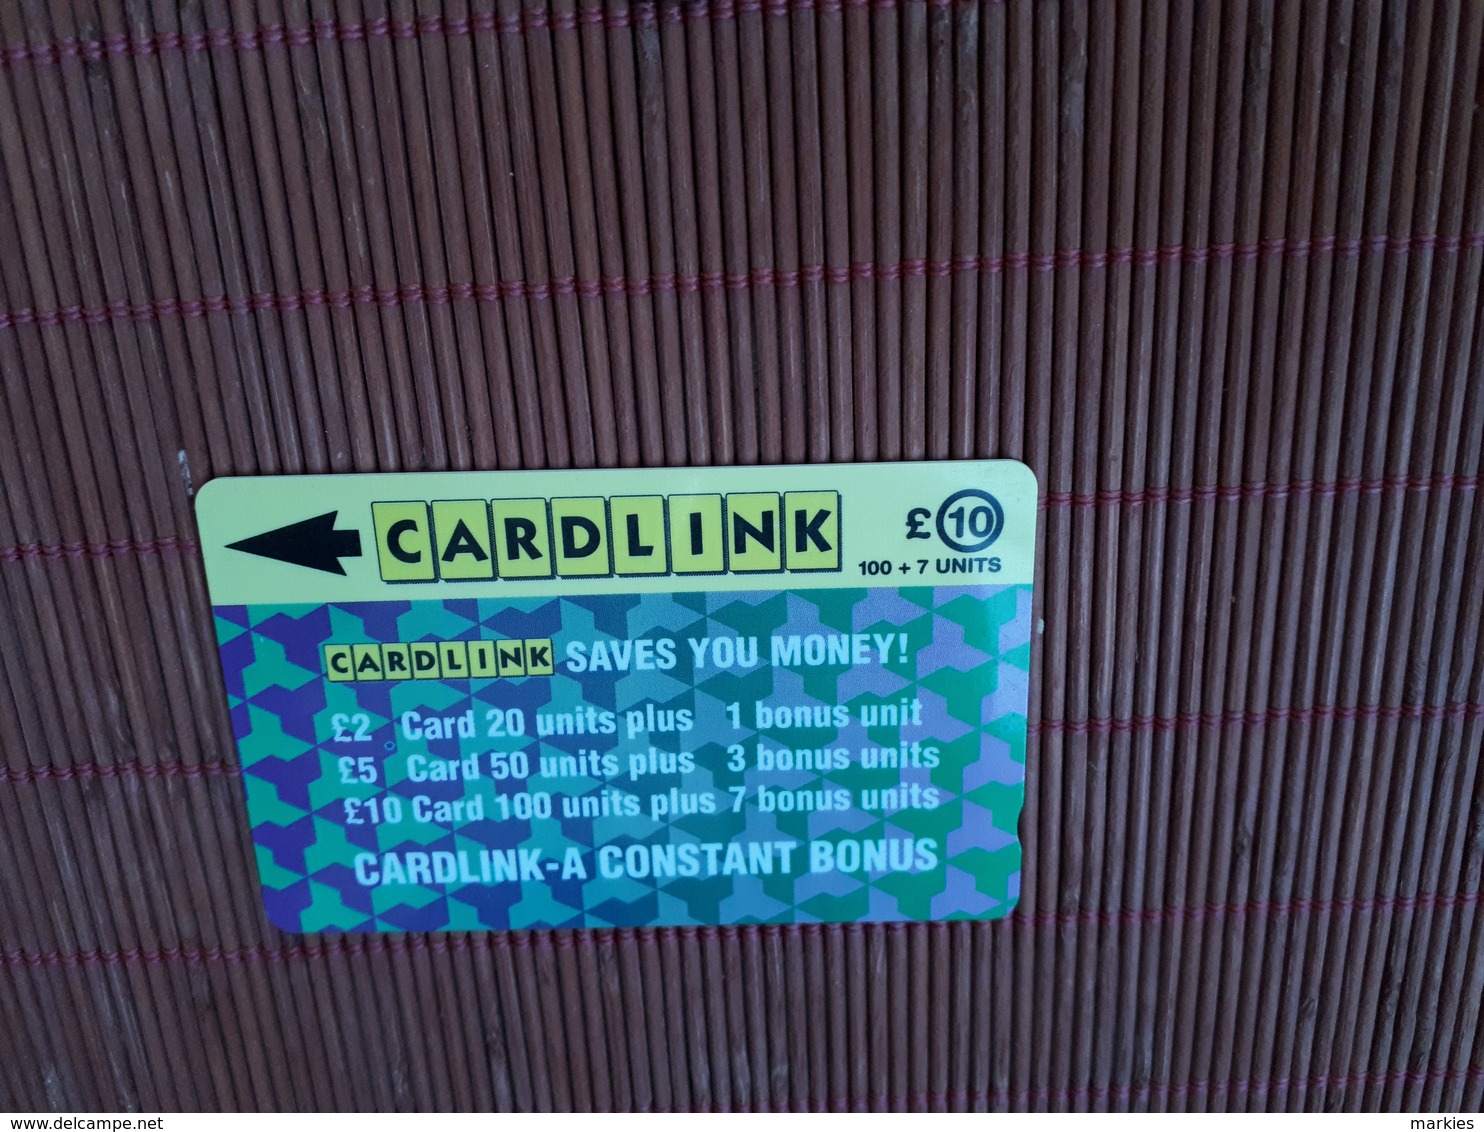 Cardlink Phonecard 2CLKC Used Only 10.000 EX. Low Issue Rare - Eurostar, Cardlink & Railcall